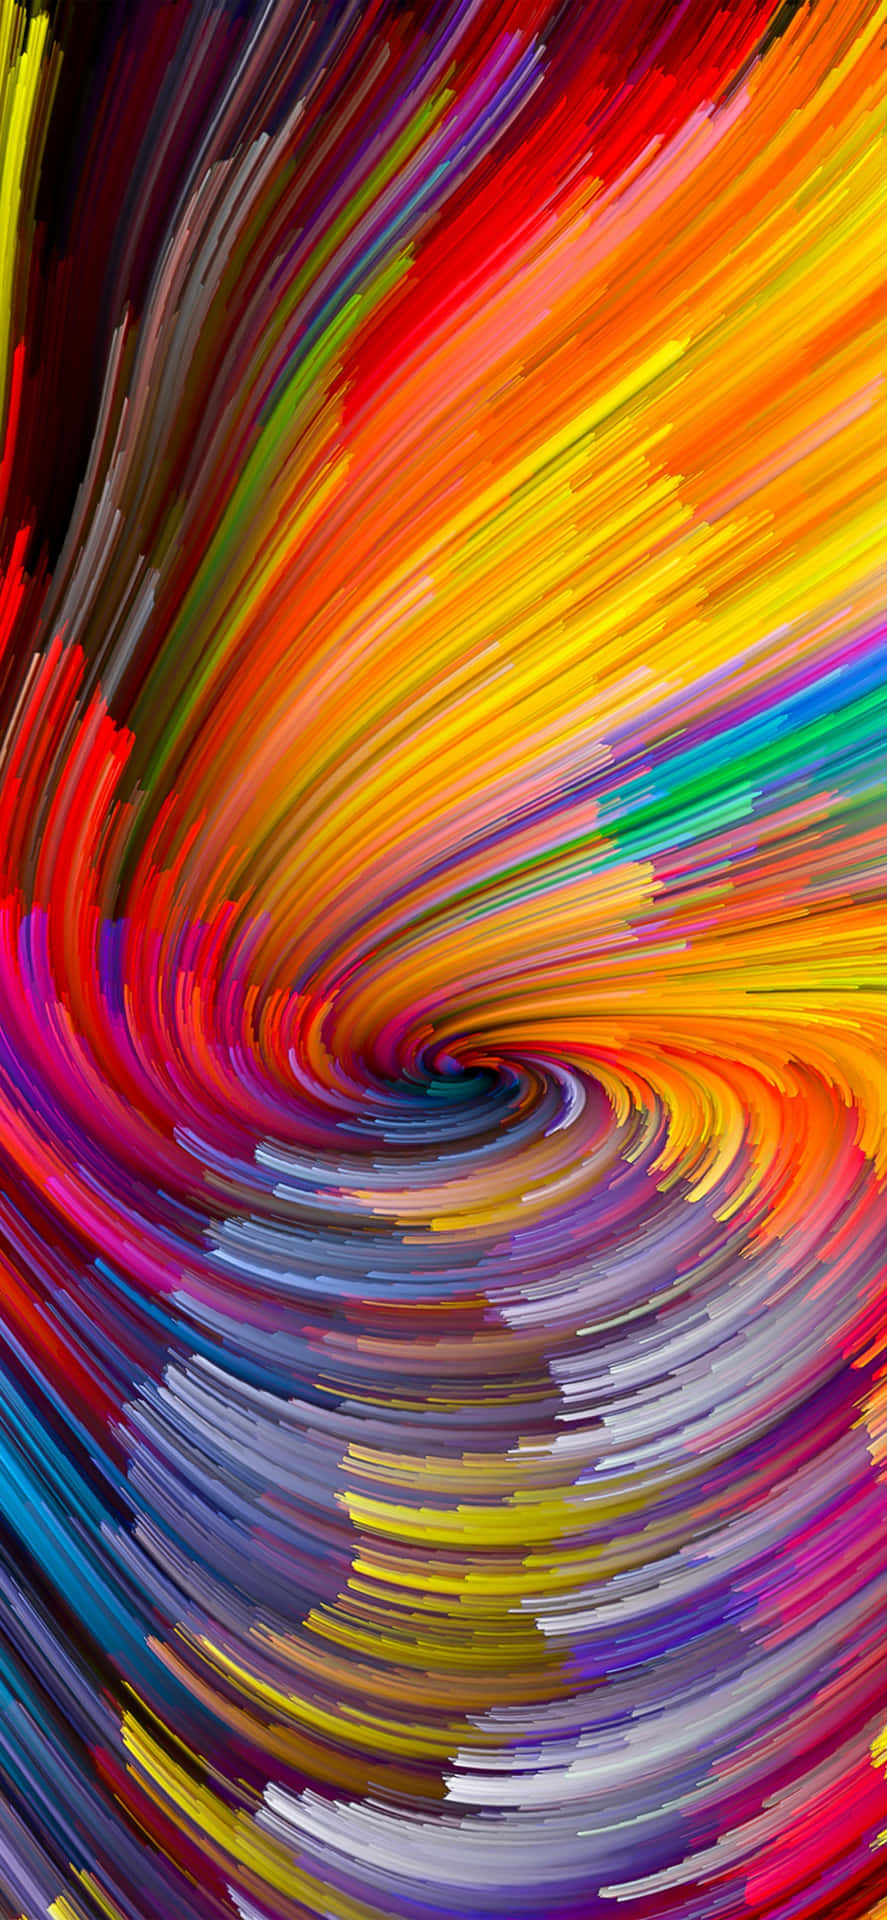 Brighten Up Your Day With A Colorful Iphone Background